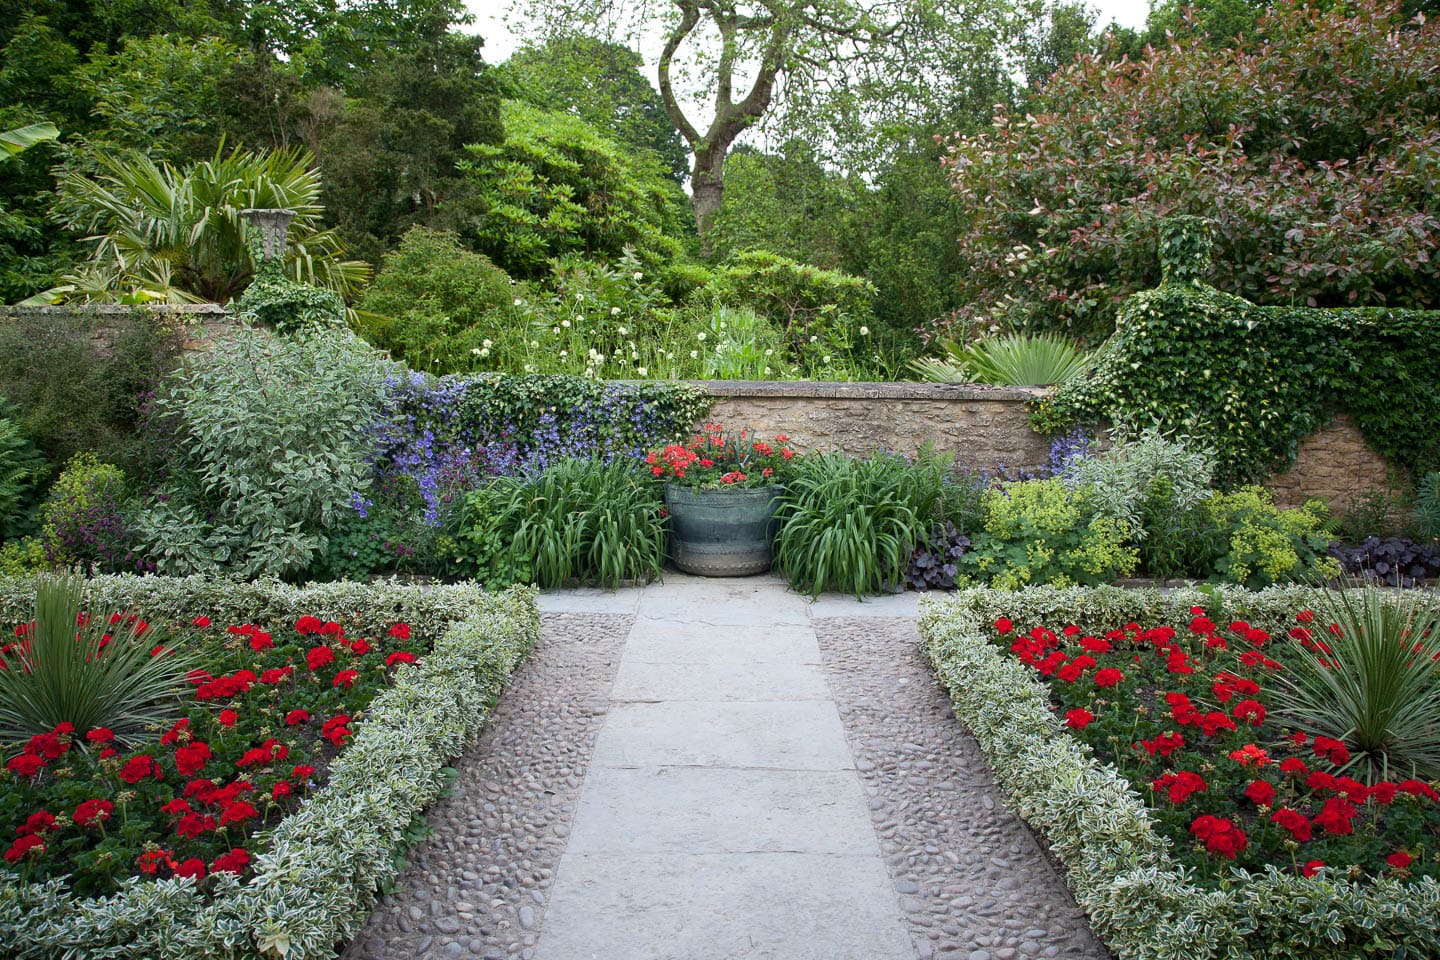 A formal garden with square gardens on each side of a central path